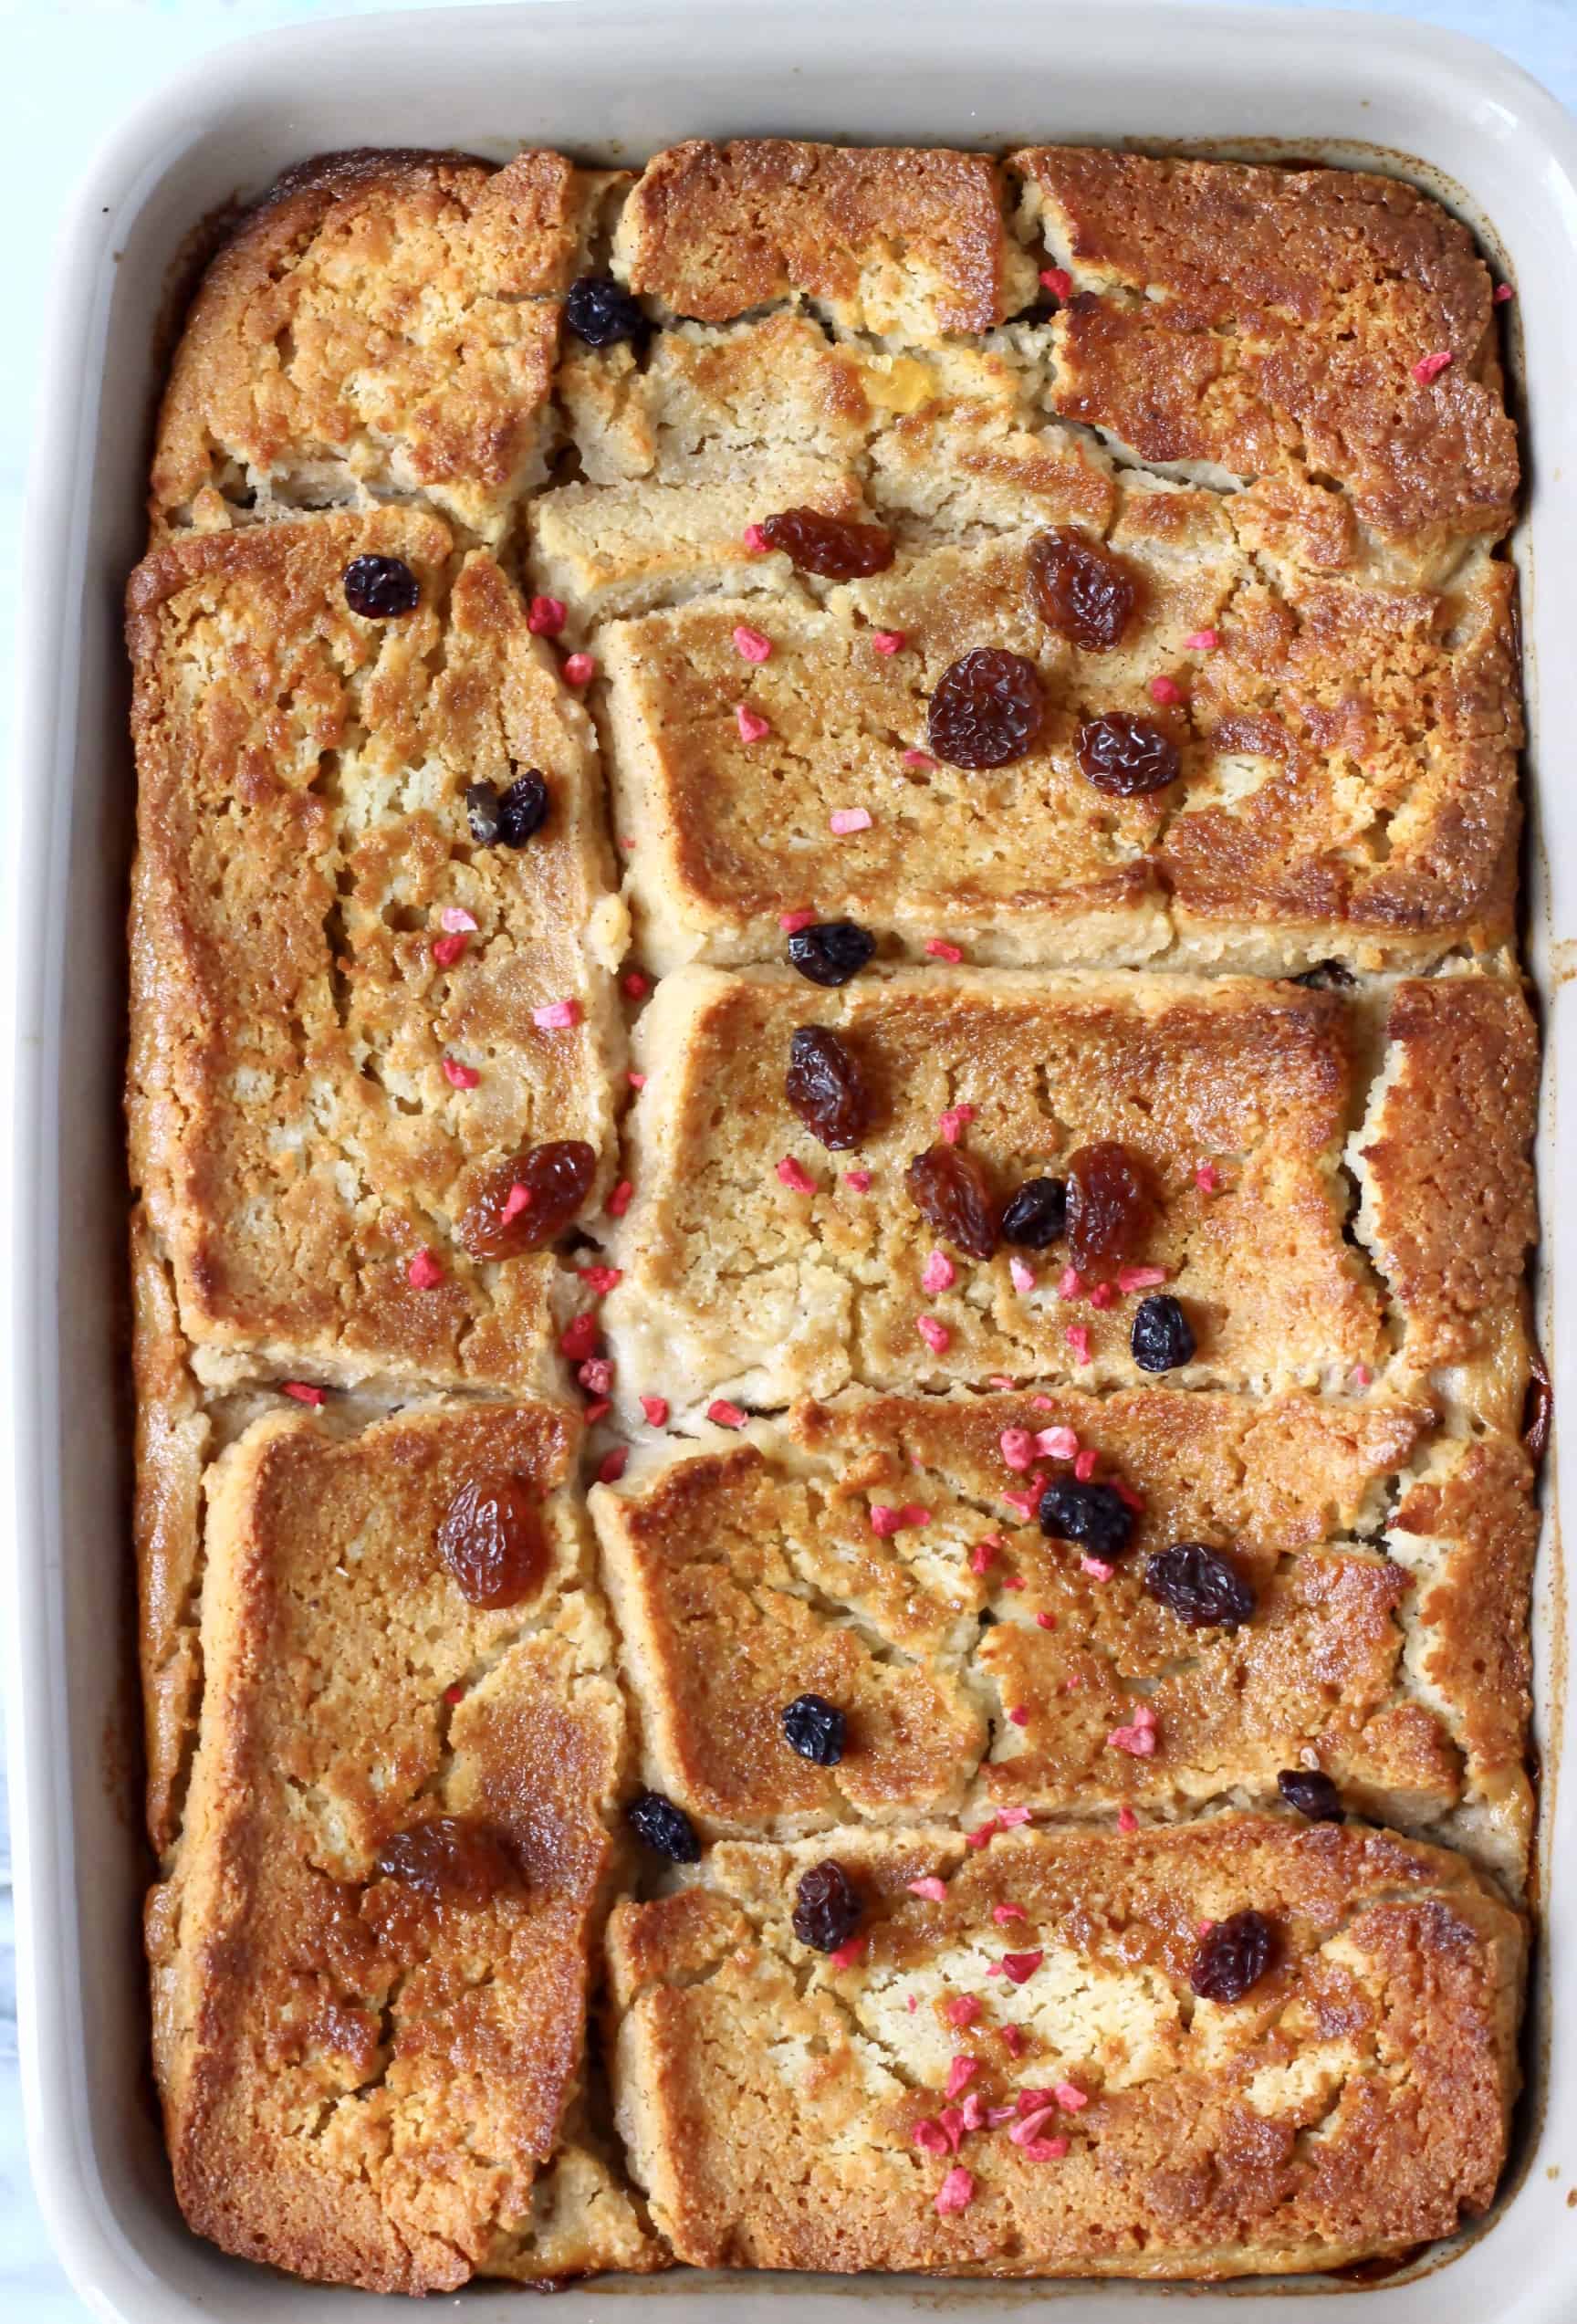 Bread pudding in a grey rectangular baking dish sprinkled with raisins